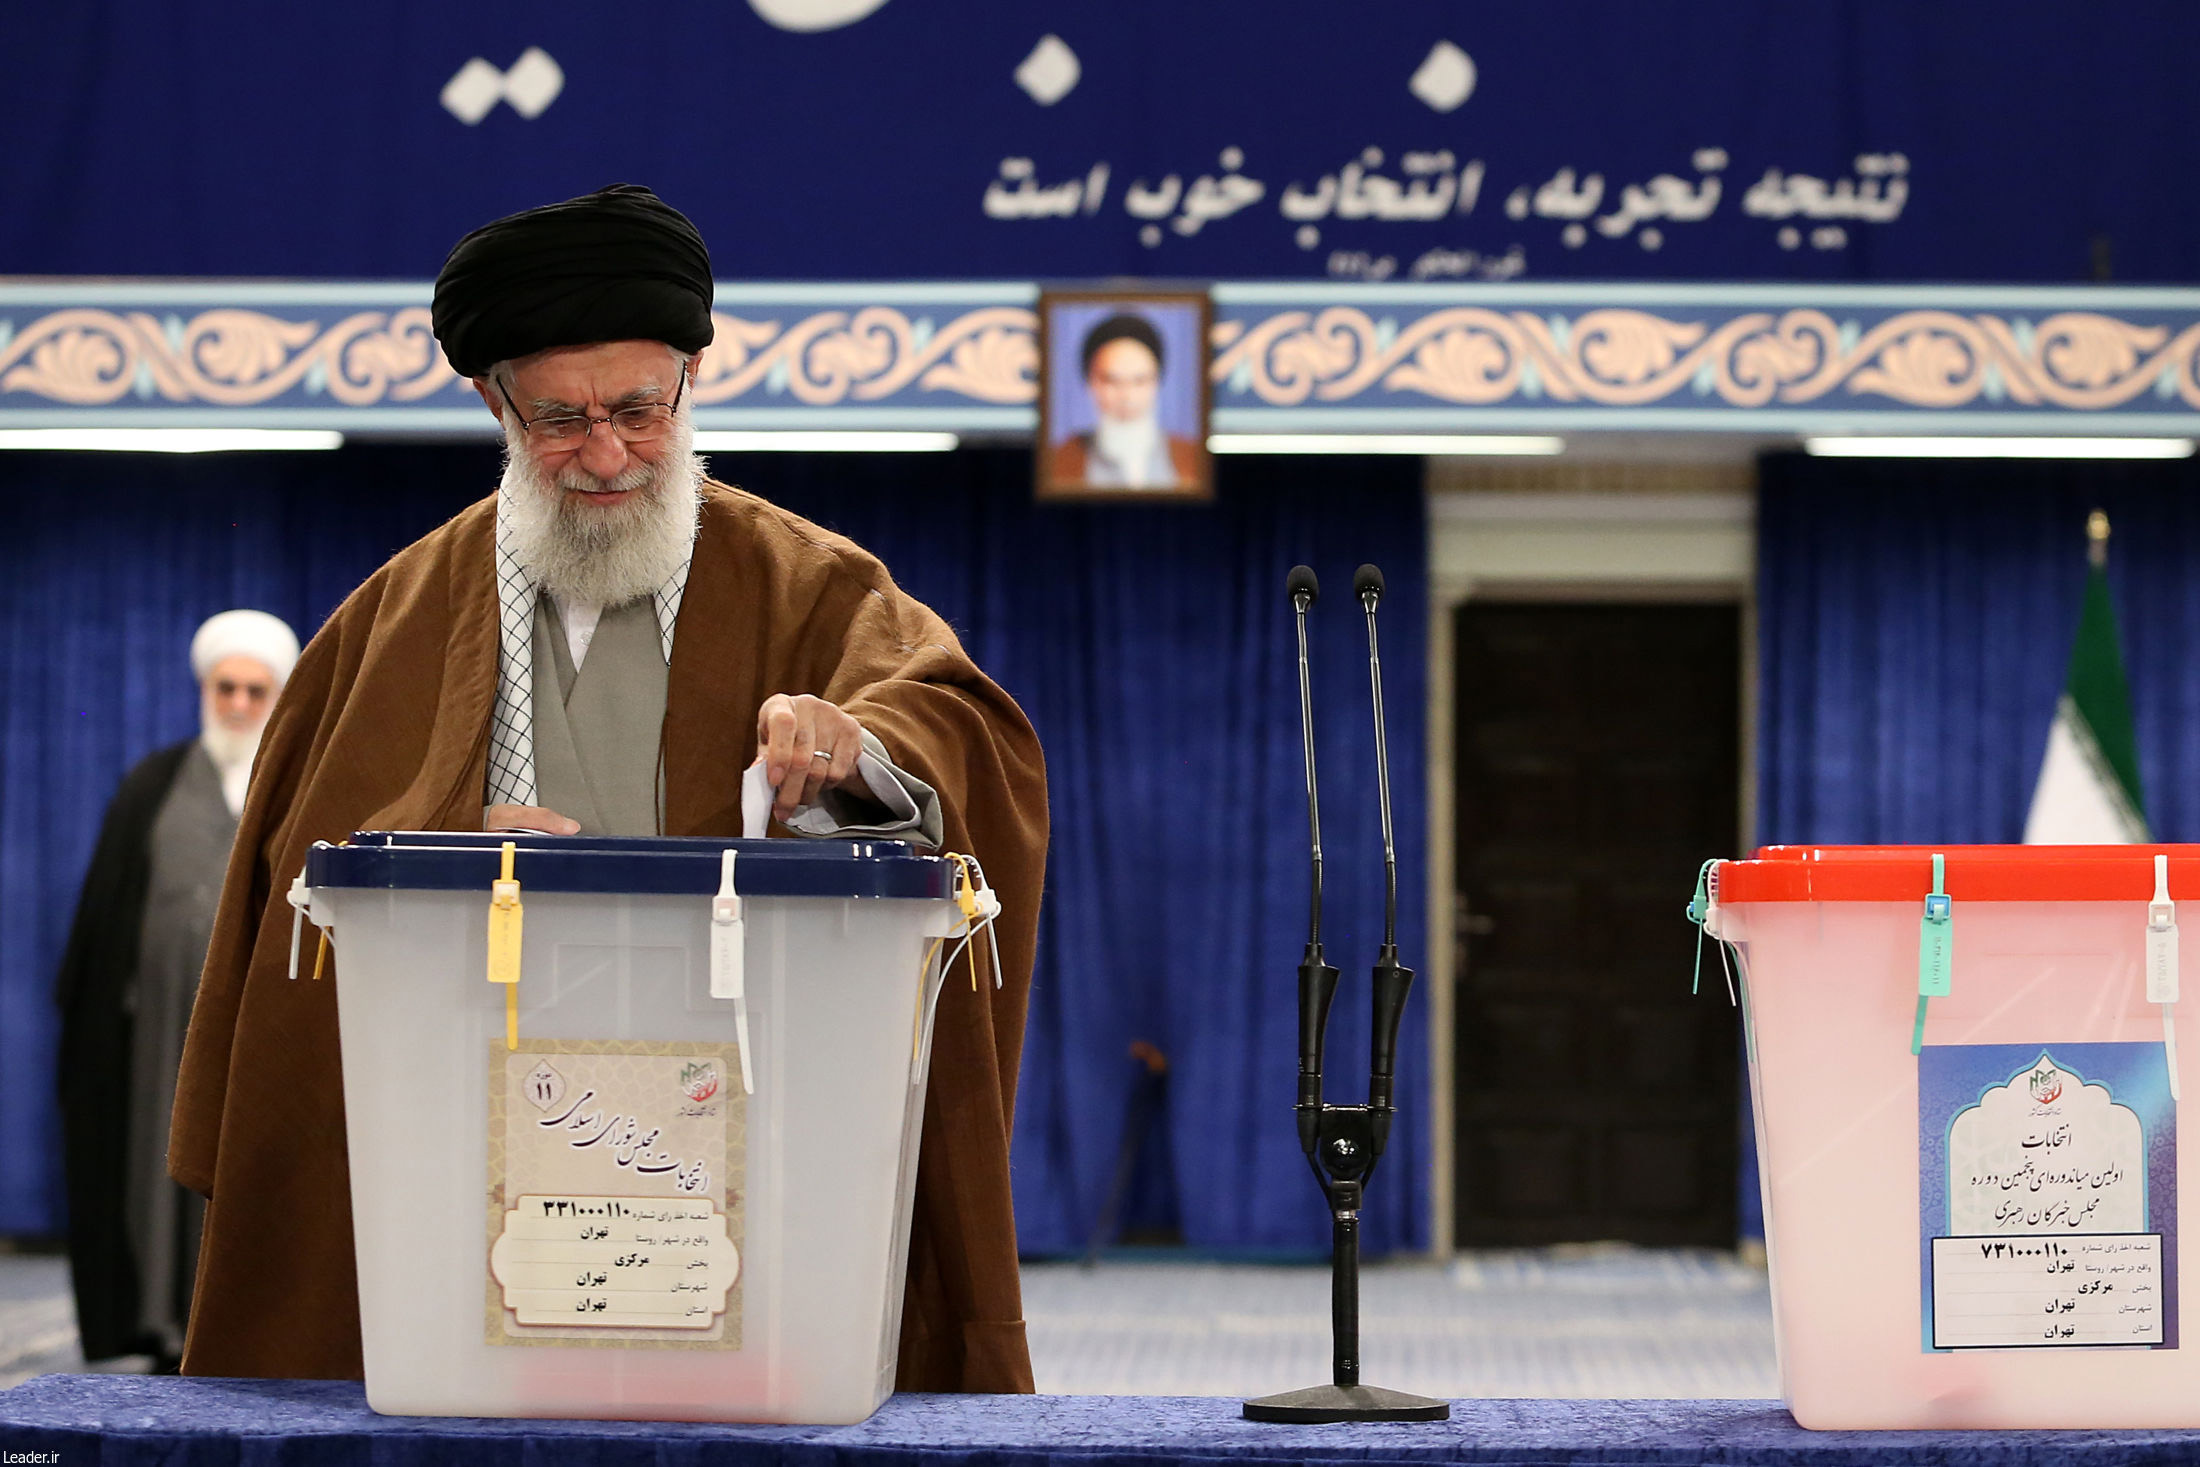 PHOTO: Handout of Iran's Supreme Leader Ayatollah Ali Khamenei casting his ballot during the parliamentary elections at a polling station in Tehran, Feb. 21, 2020.